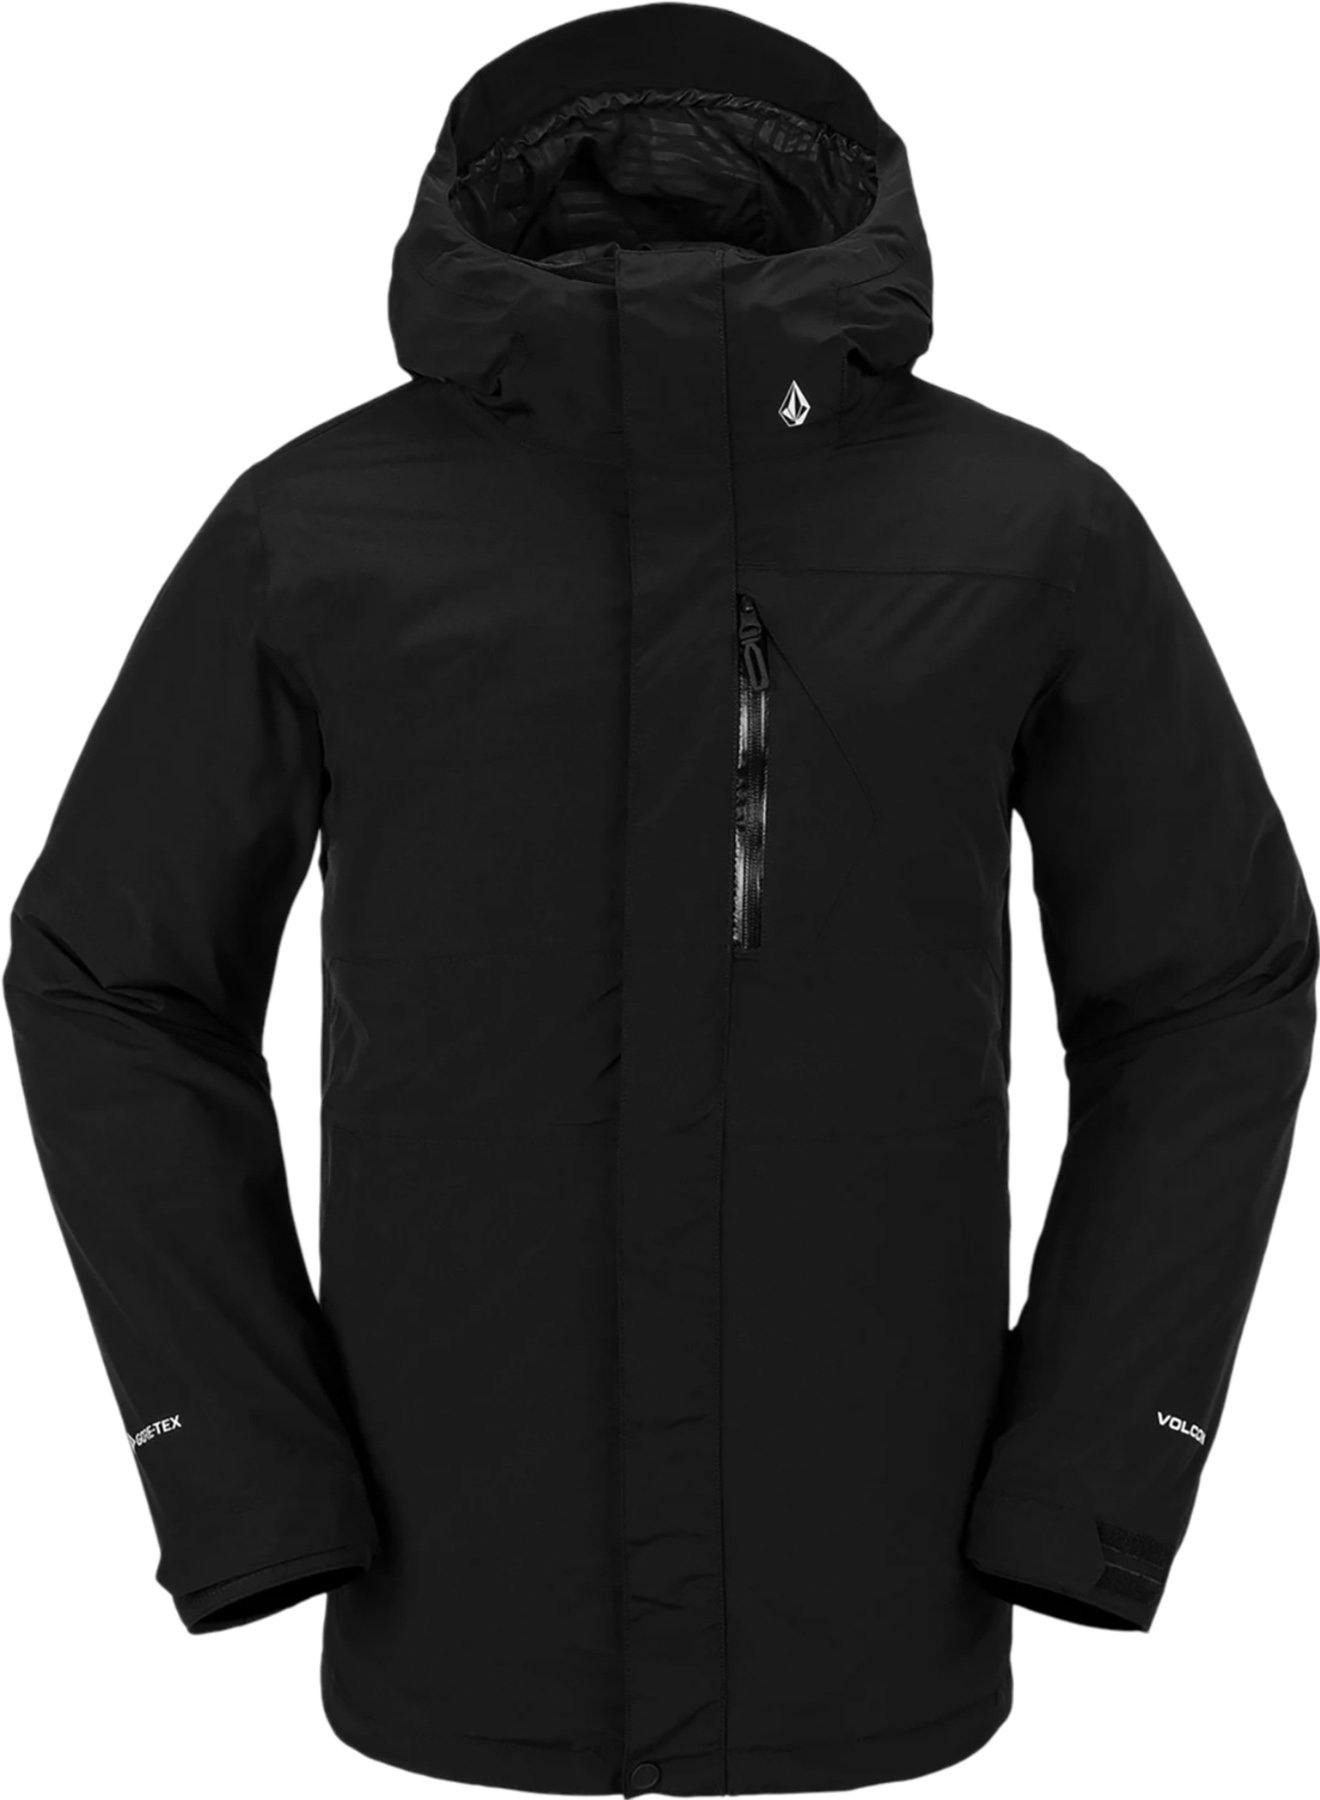 Product image for L Insulated GORE-TEX Jacket - Men's